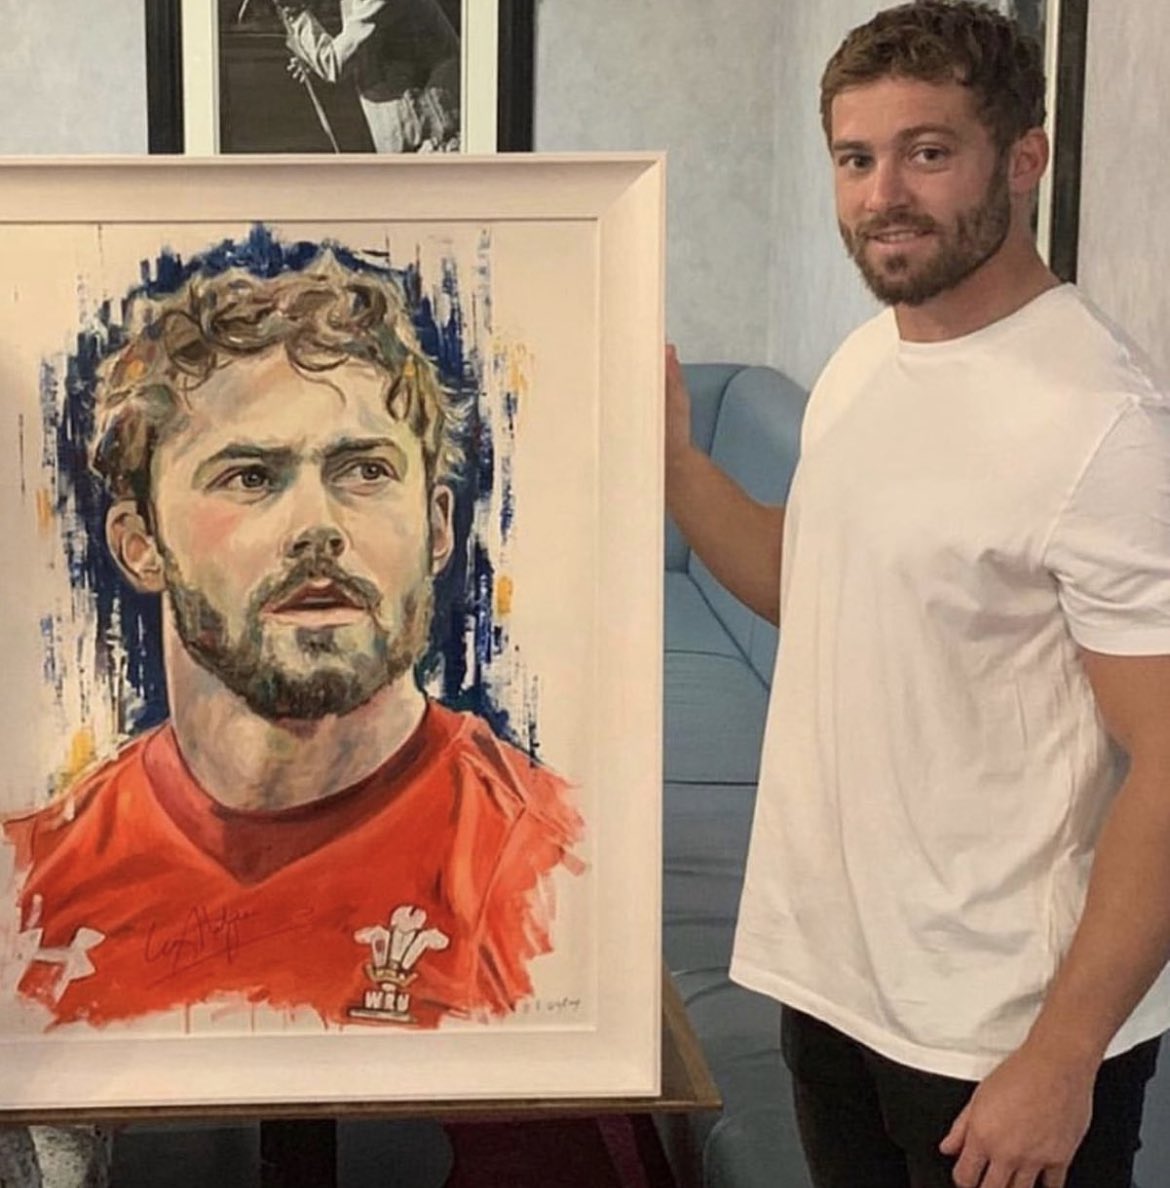 What an international career this man has had! A legend through and through! Thank you Leigh  🙌👏🏴󠁧󠁢󠁷󠁬󠁳󠁿 #leighhalfpenny #welshrugby #legend #RugbyWorldCup